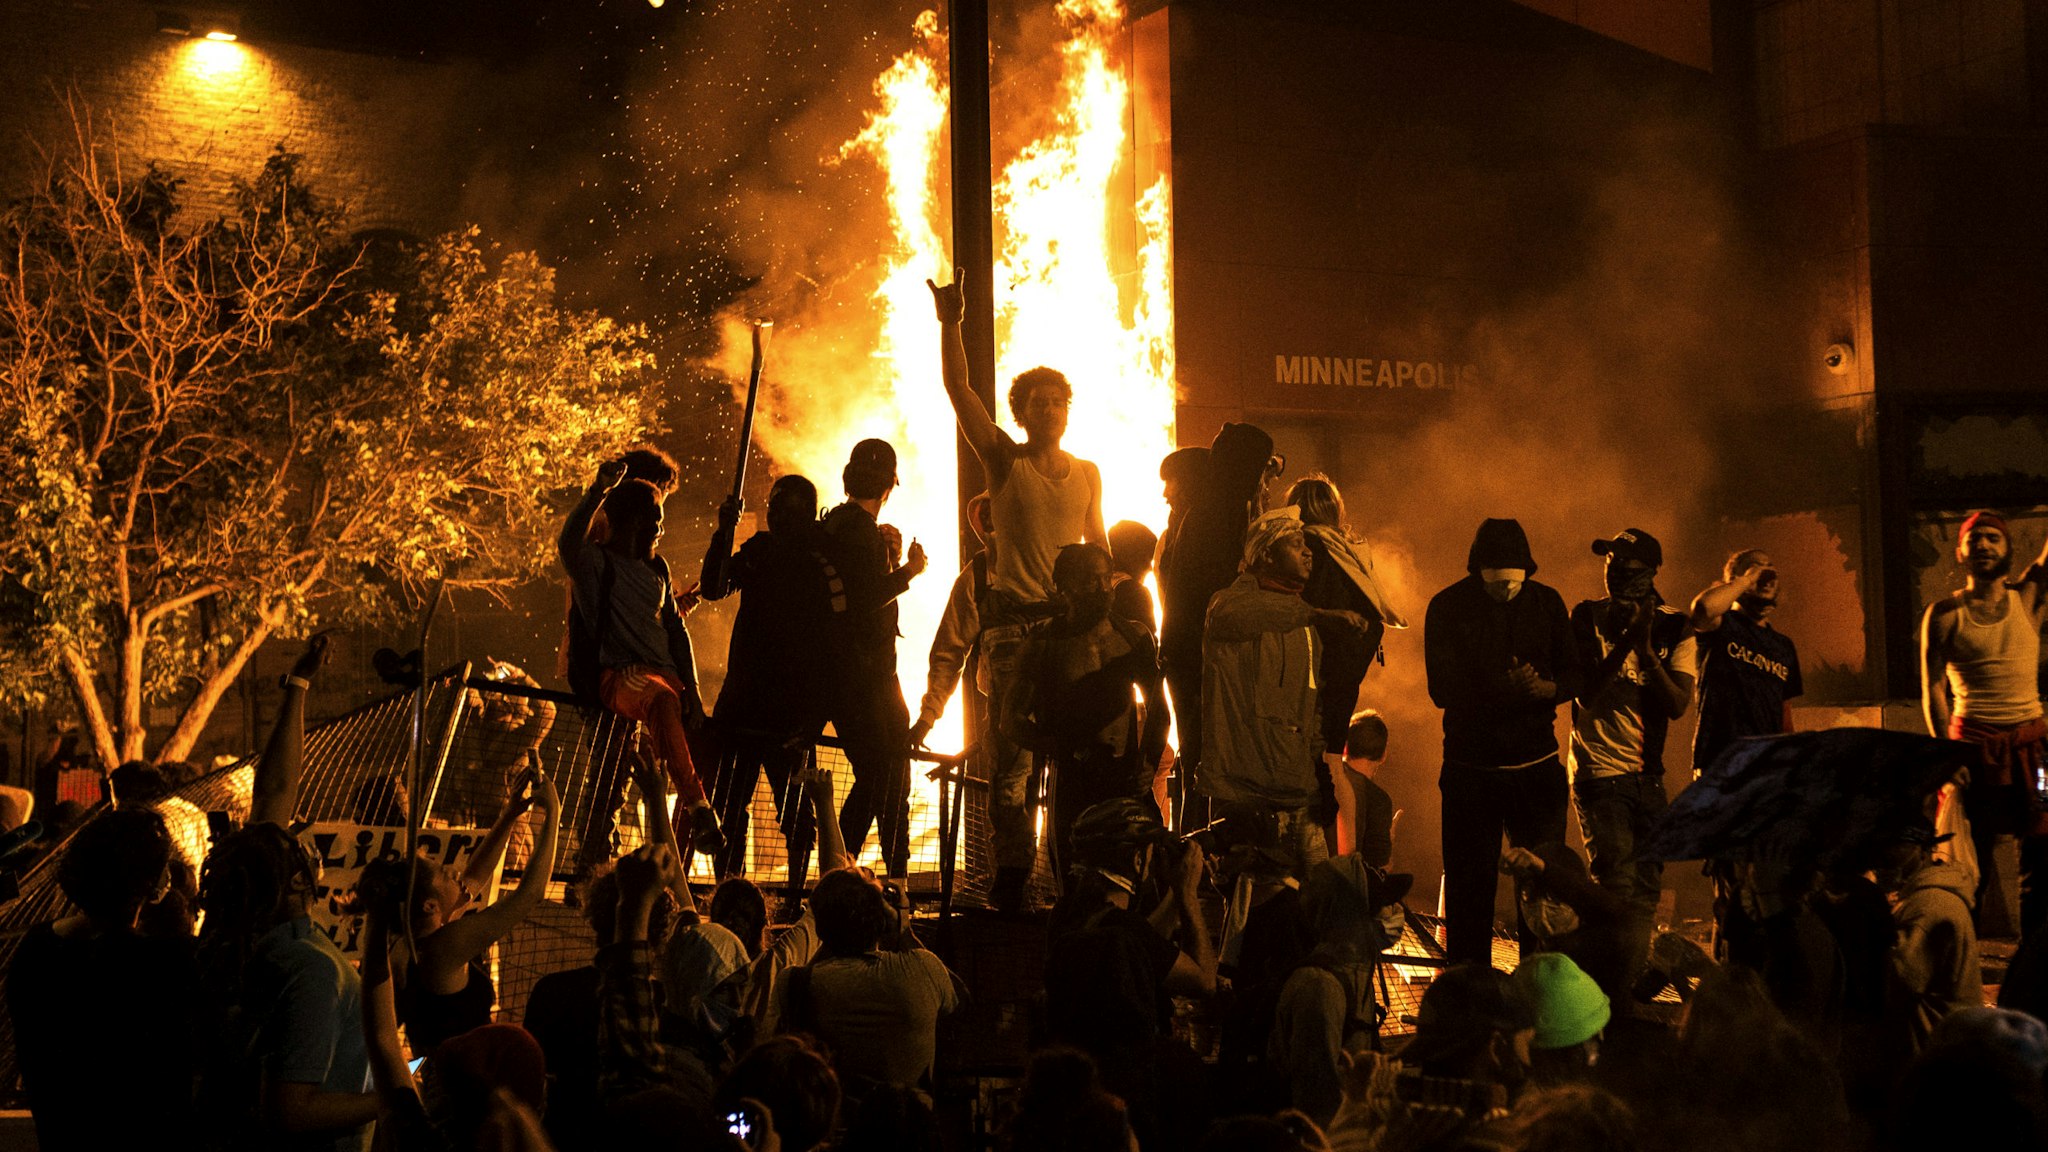 MINNEAPOLIS, MN - MAY 28: Protesters cheer as the Third Police Precinct burns behind them on May 28, 2020 in Minneapolis, Minnesota. As unrest continues after the death of George Floyd, police abandoned the precinct building, allowing protesters to set fire to it.